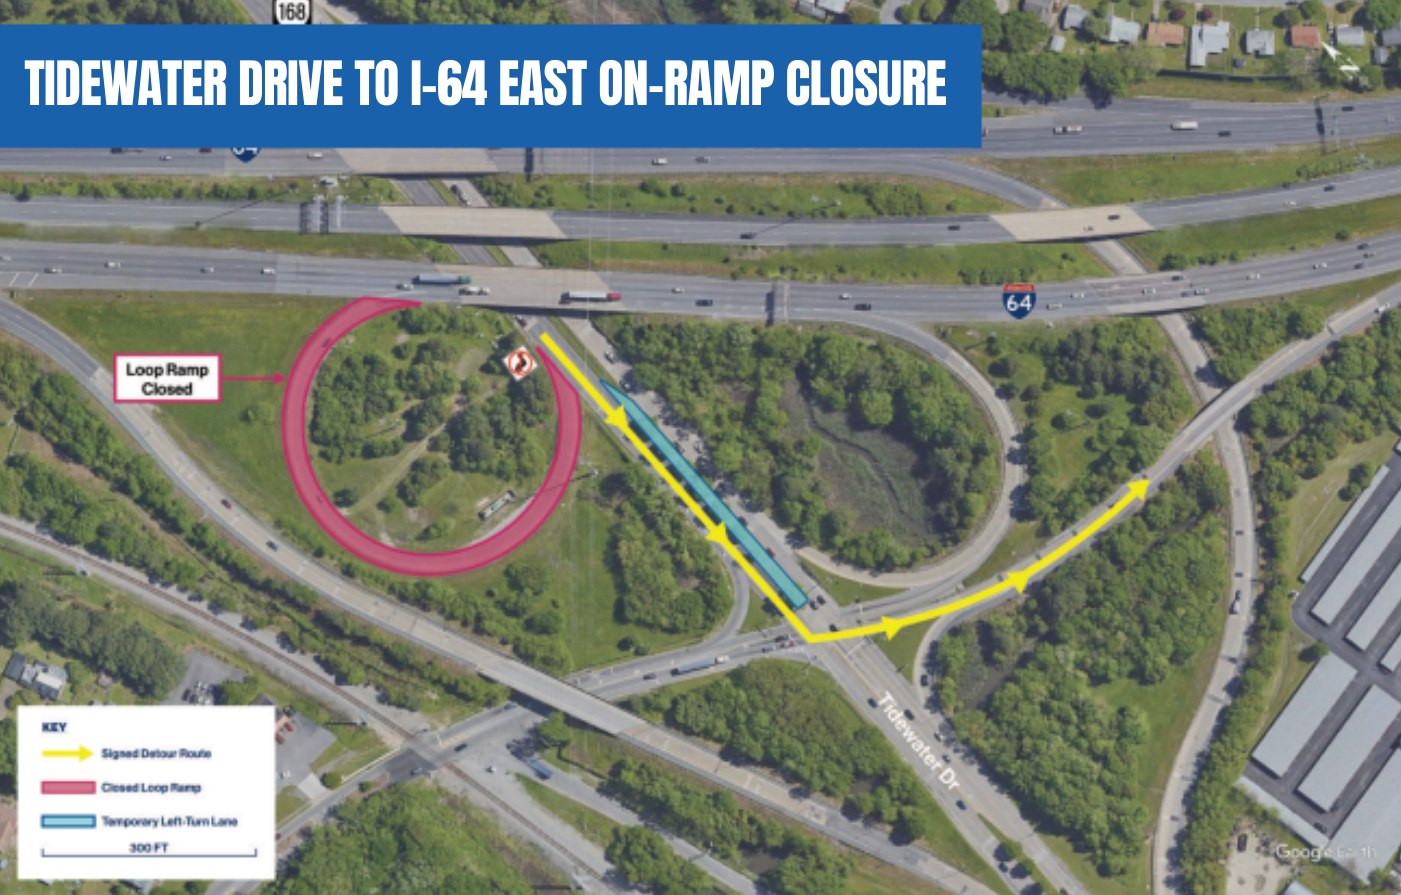 I-64 East on-ramp at Tidewater Dr. in Norfolk to close